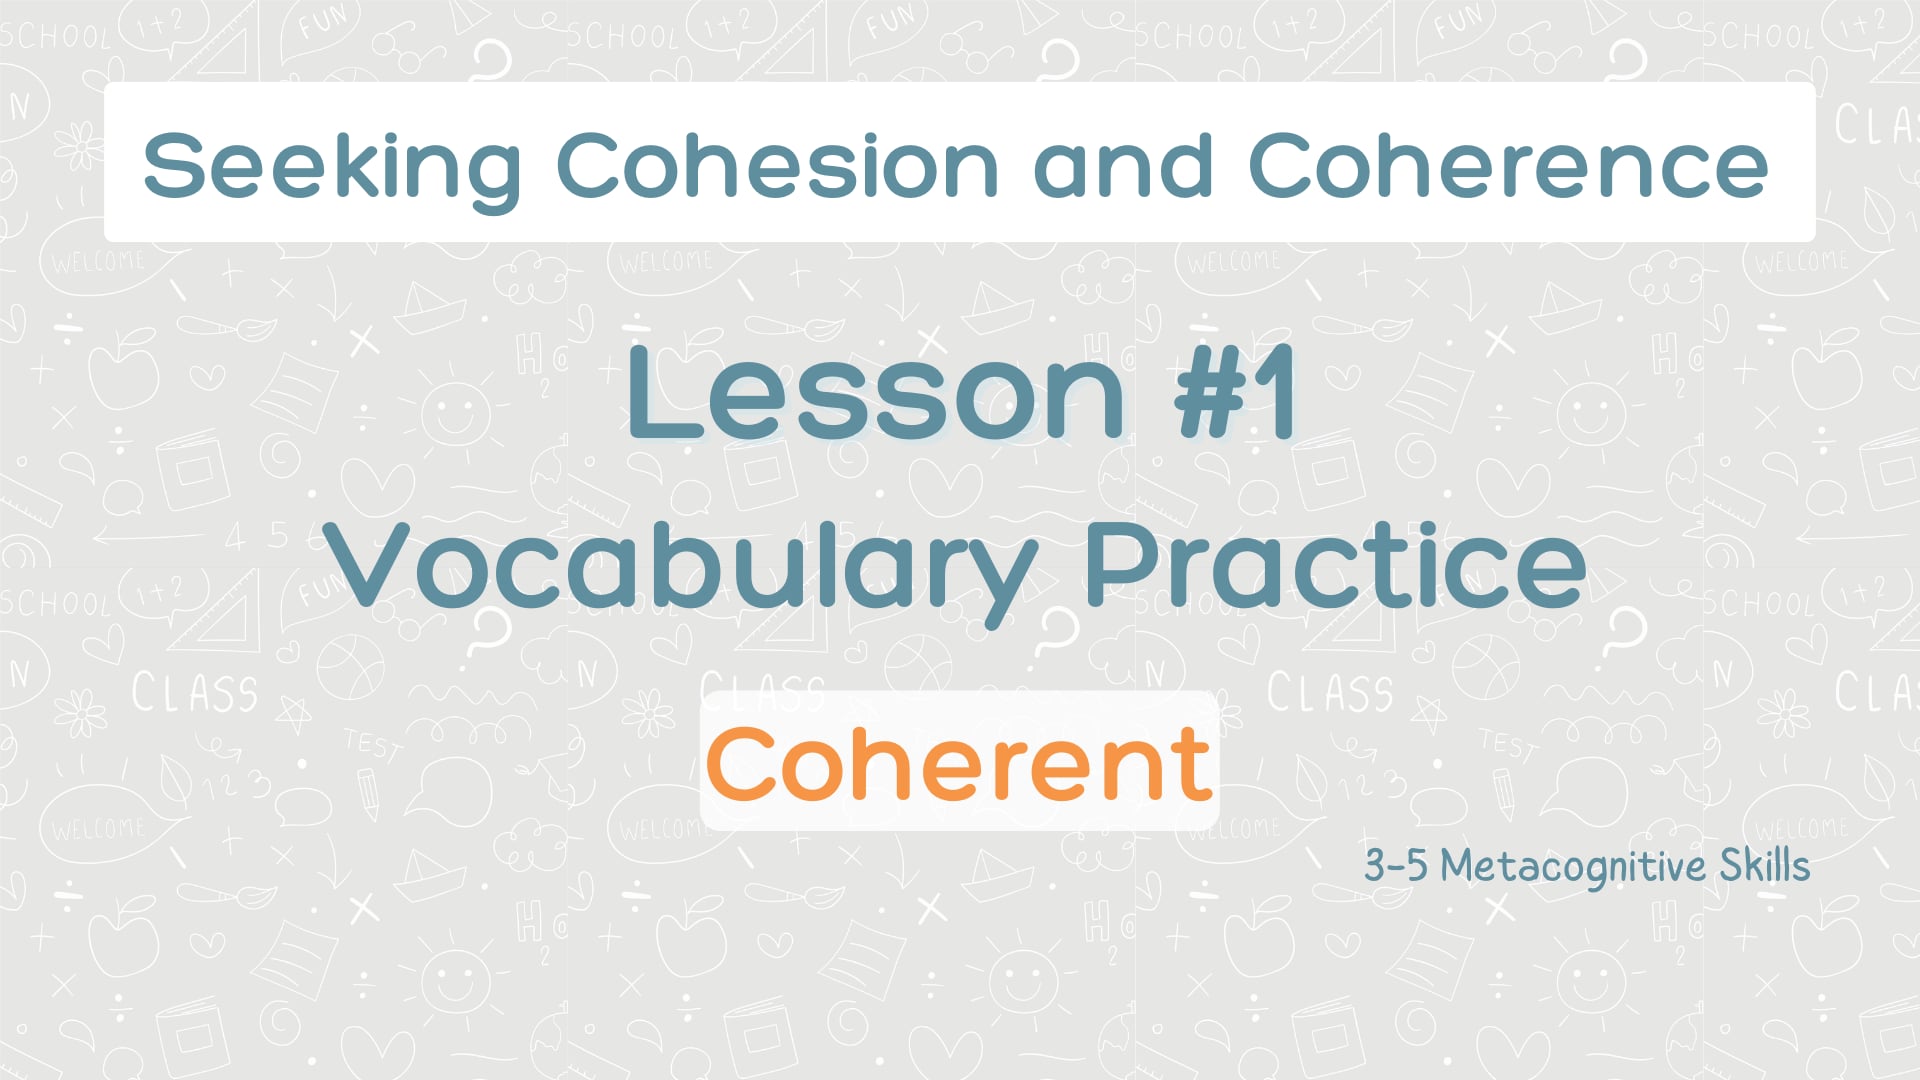 Lesson #1 Vocabulary Practice: Coherent video thumbnail